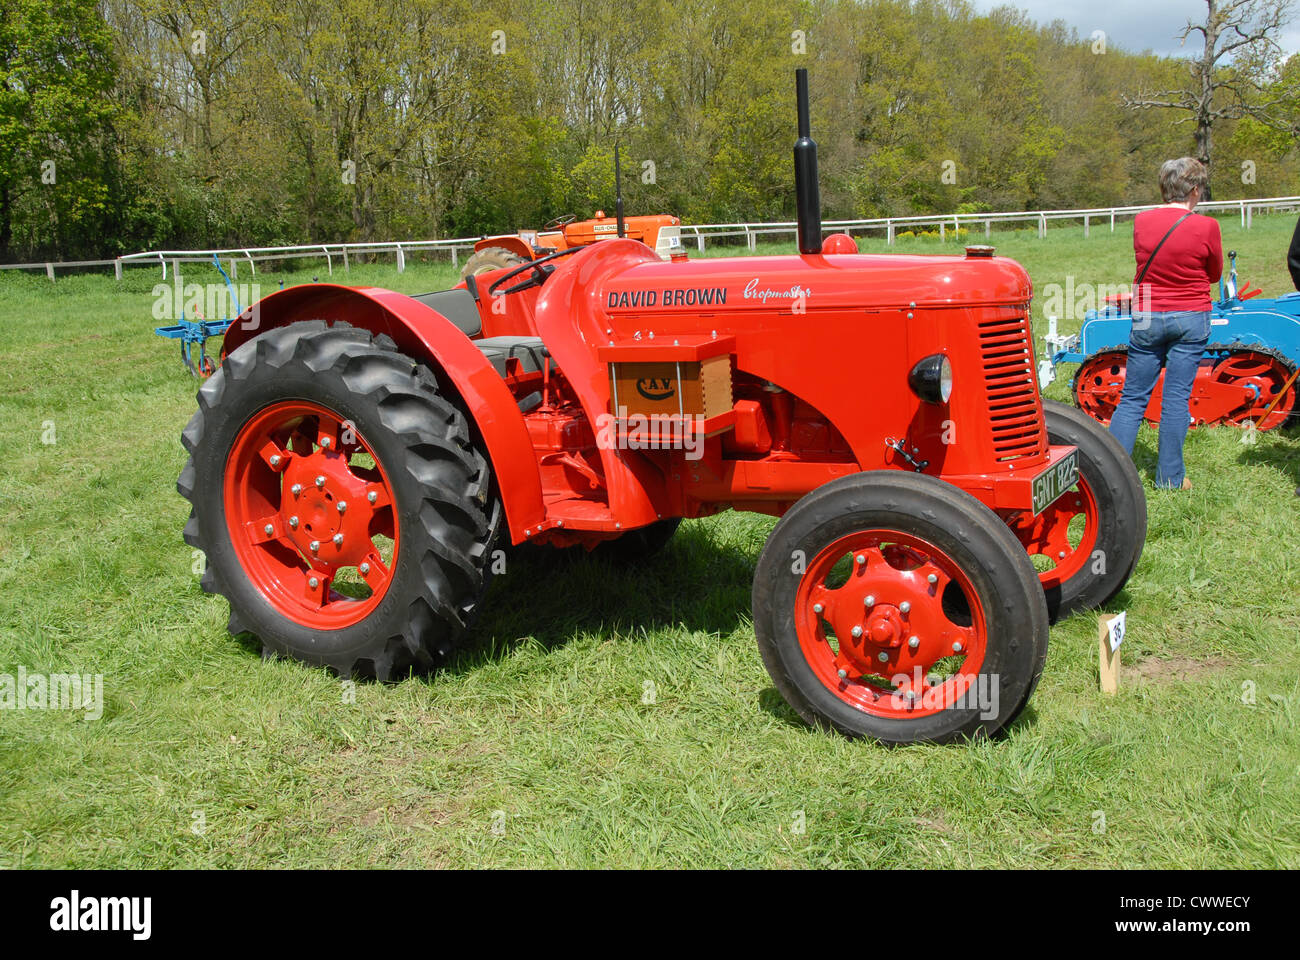 David Brown year 1947/48 restored vintage tractor Stock Photo